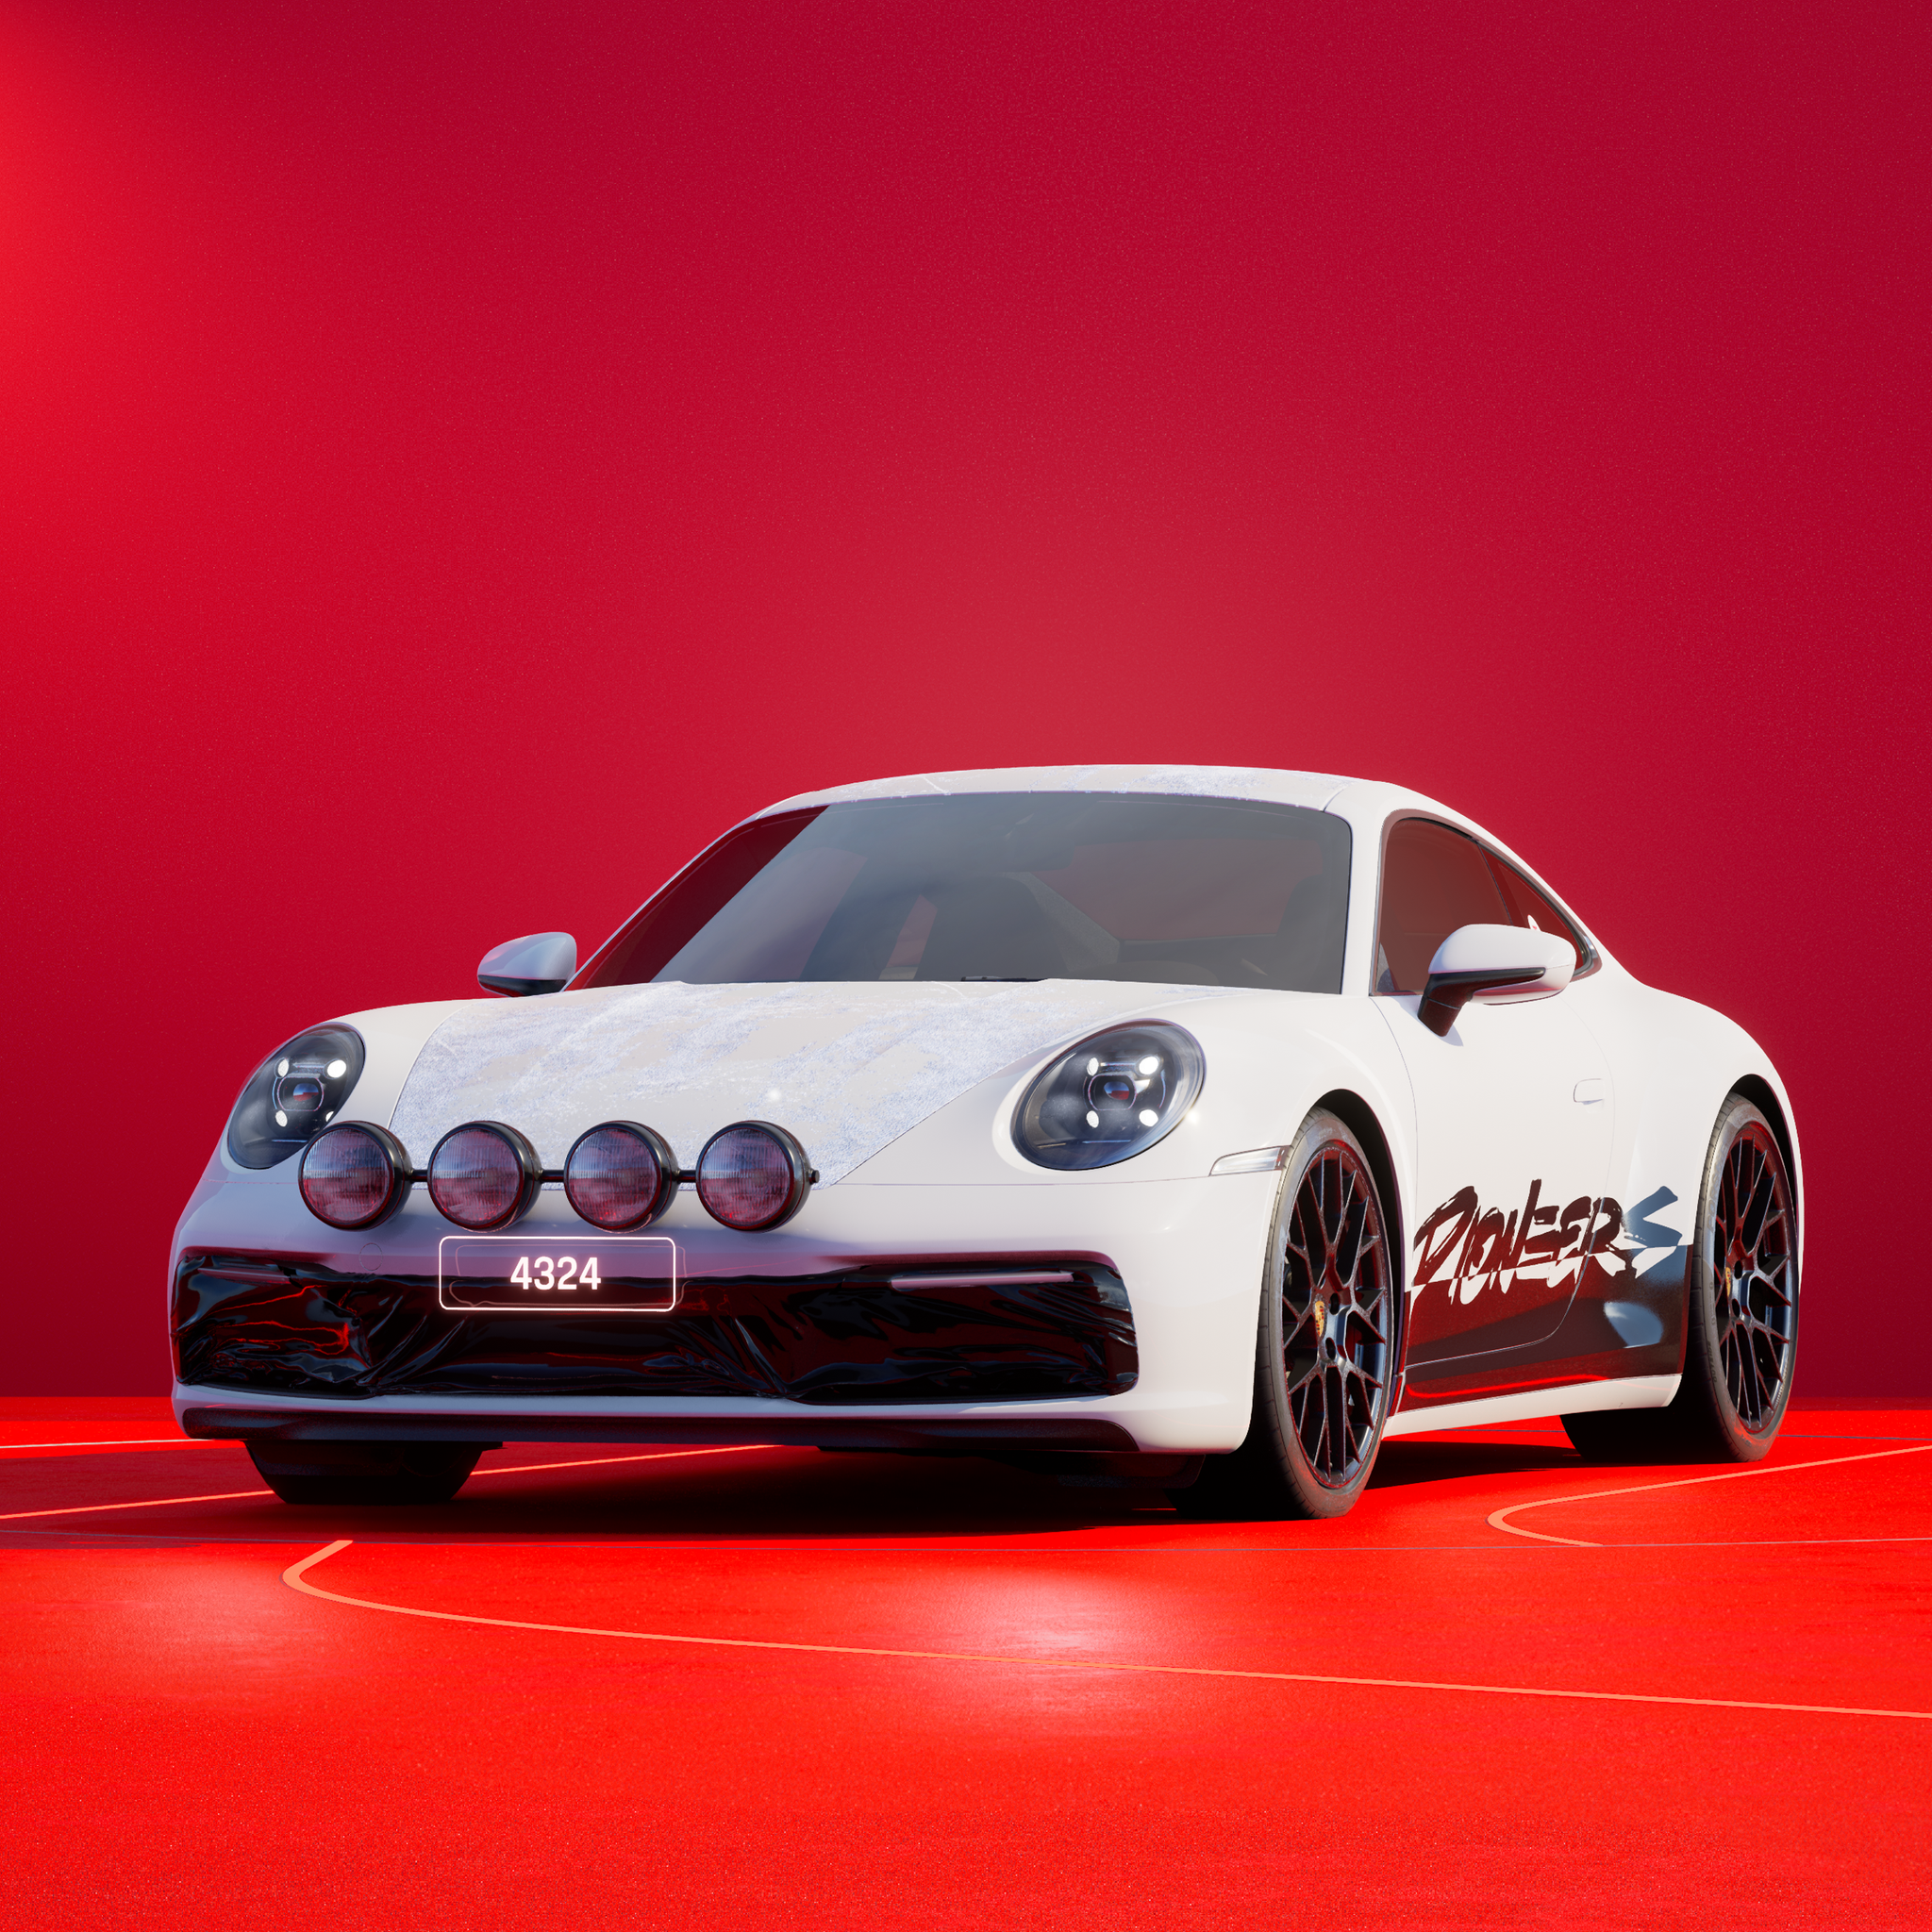 The PORSCHΞ 911 4324 image in phase